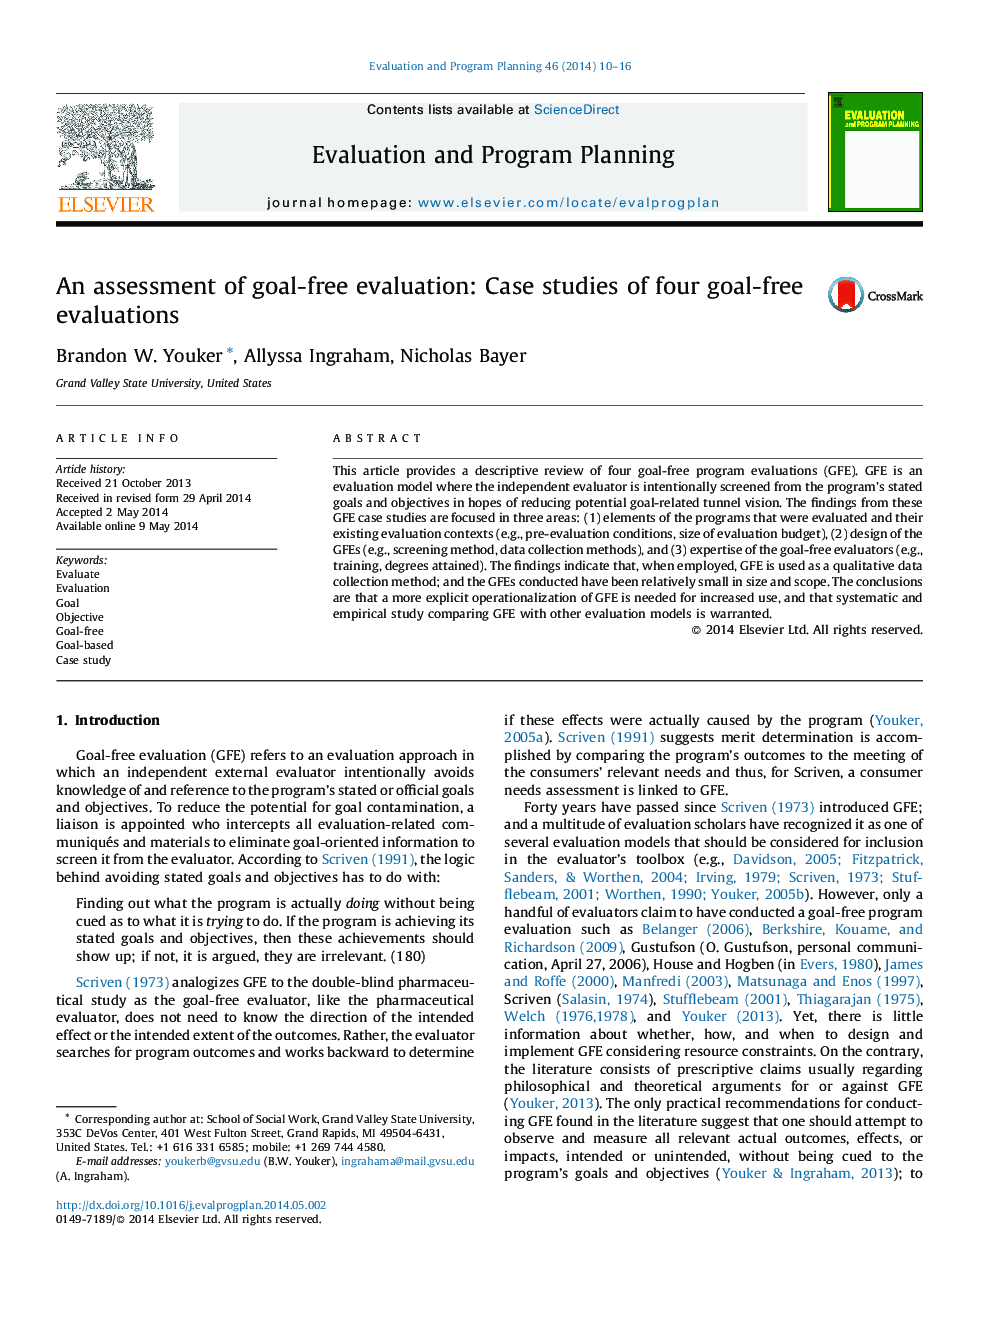 An assessment of goal-free evaluation: Case studies of four goal-free evaluations